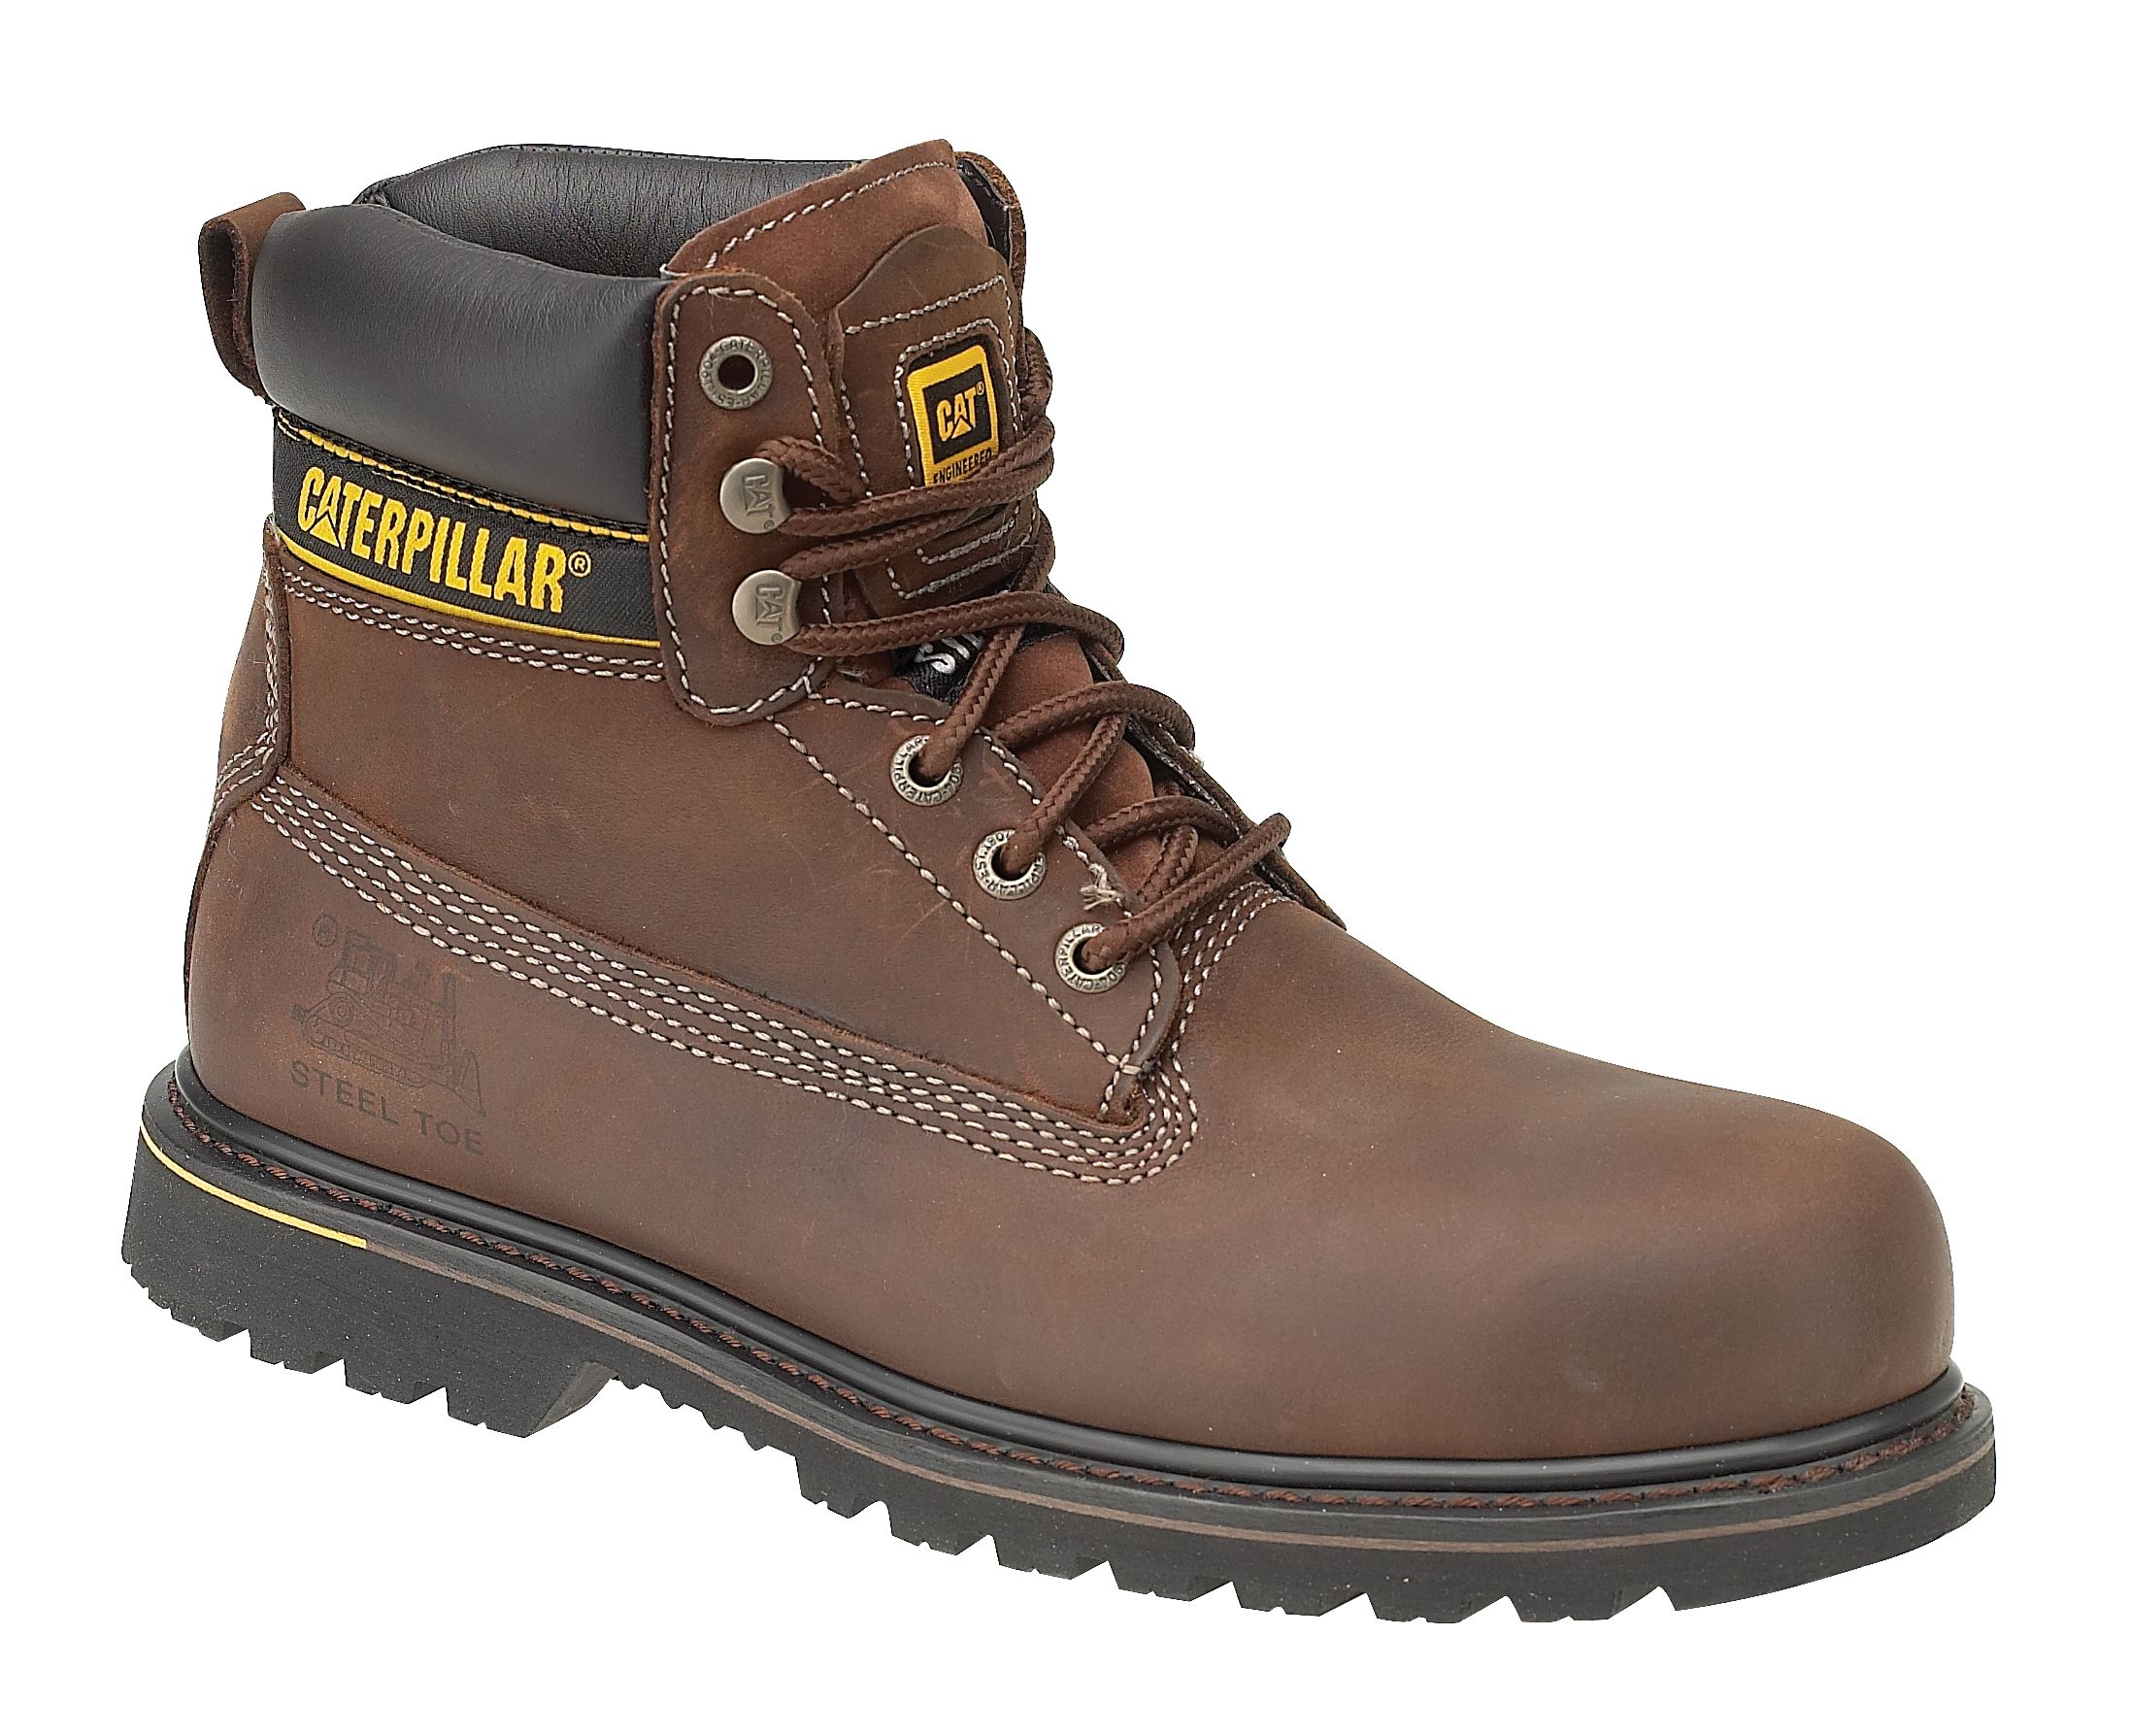 Image of Caterpillar CAT Holton SB Safety Boot - Brown Size 14